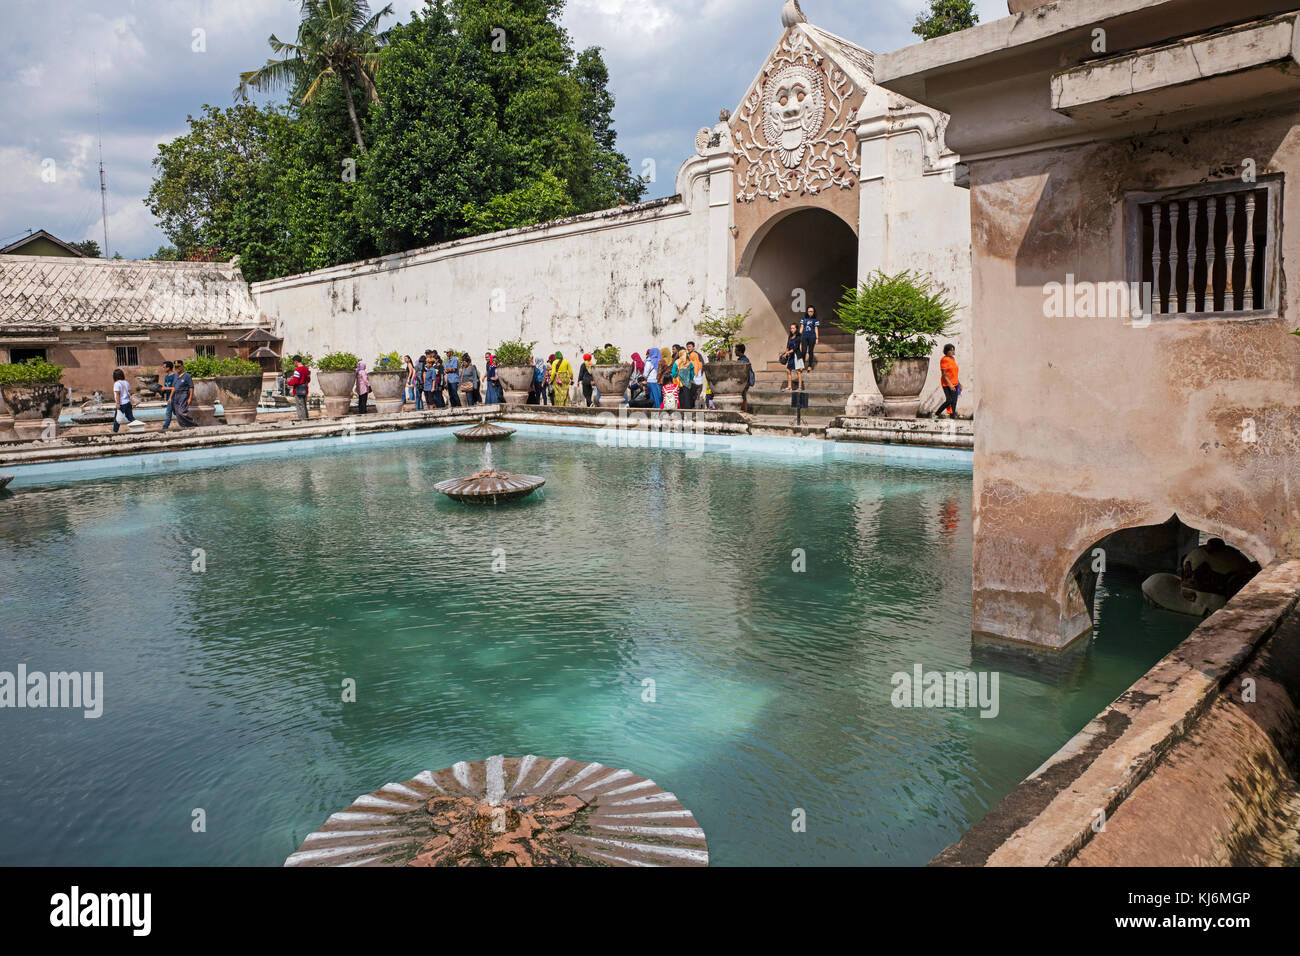 Bathing complex at the Taman Sari Water Castle, site of a former royal garden of the Sultanate of Yogyakarta, Java, Indonesia Stock Photo